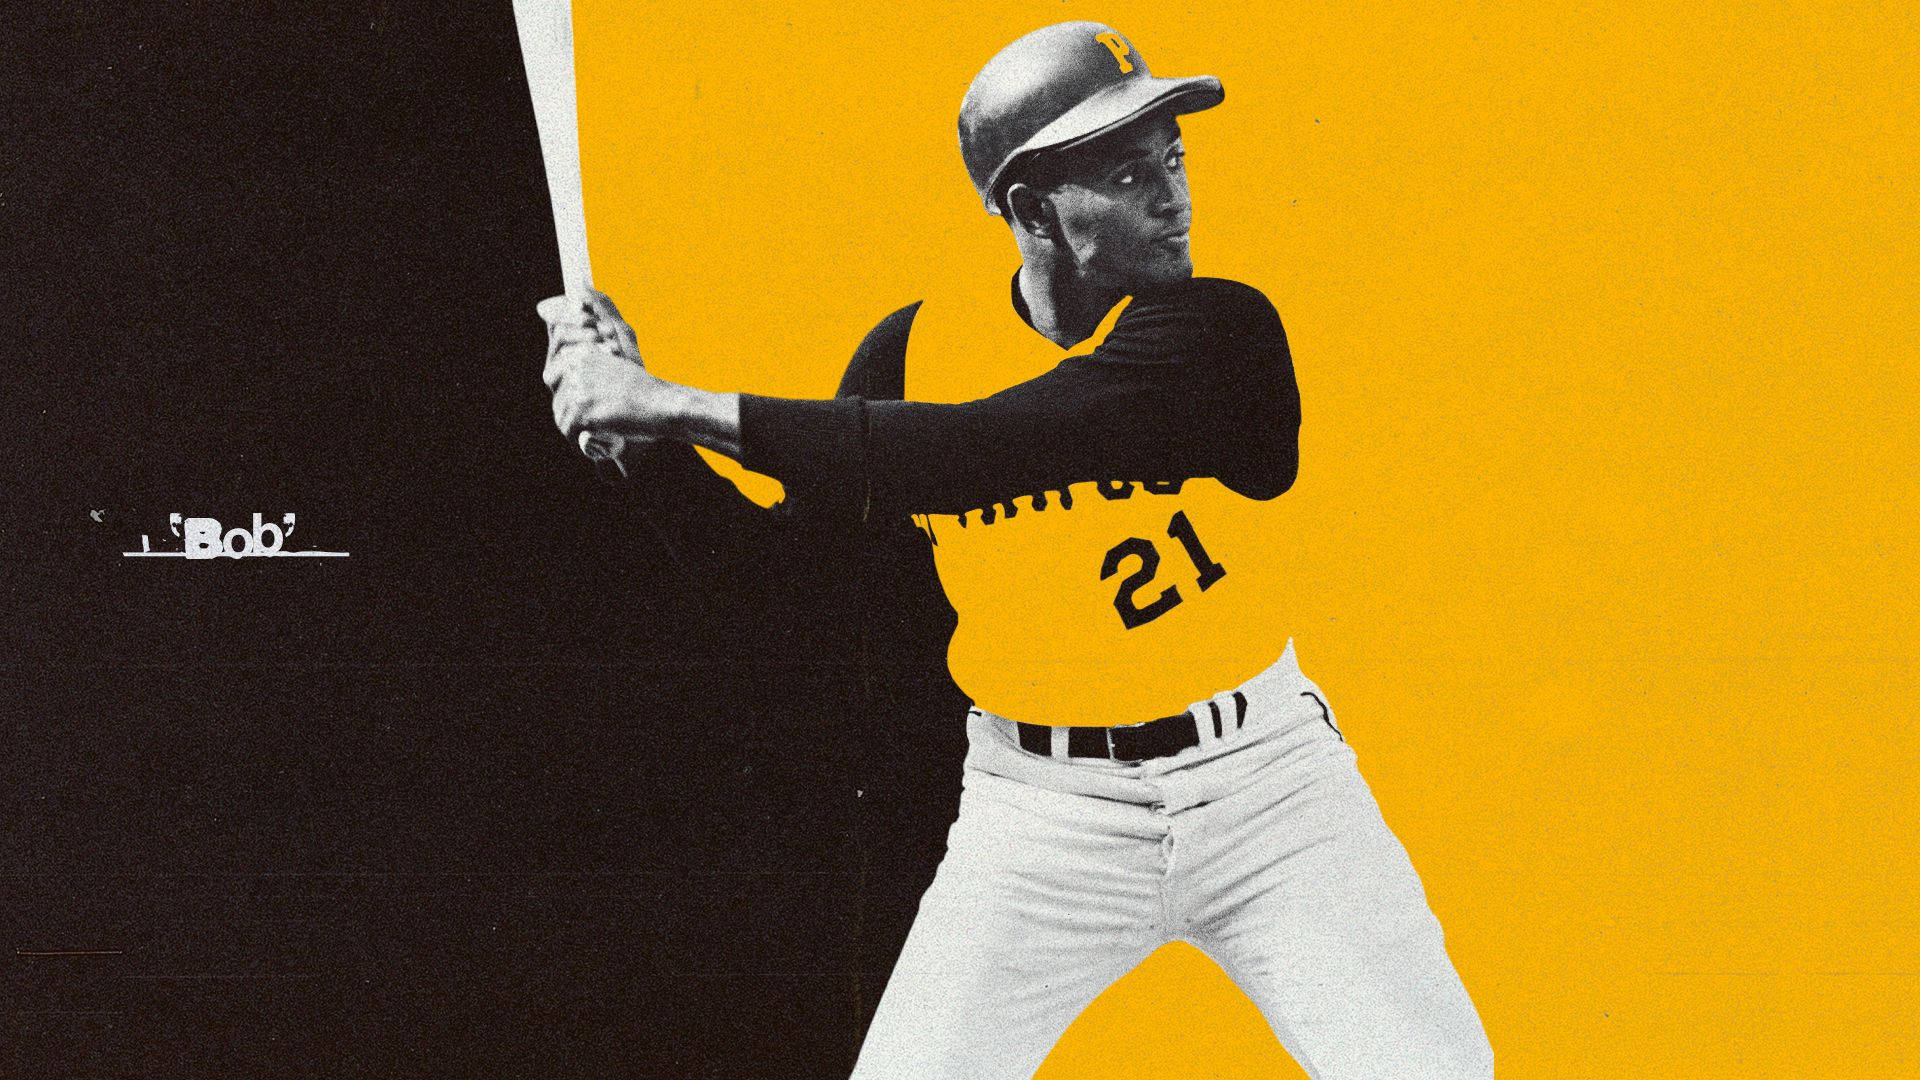 Roberto Clemente Black And Yellow Poster Wallpaper